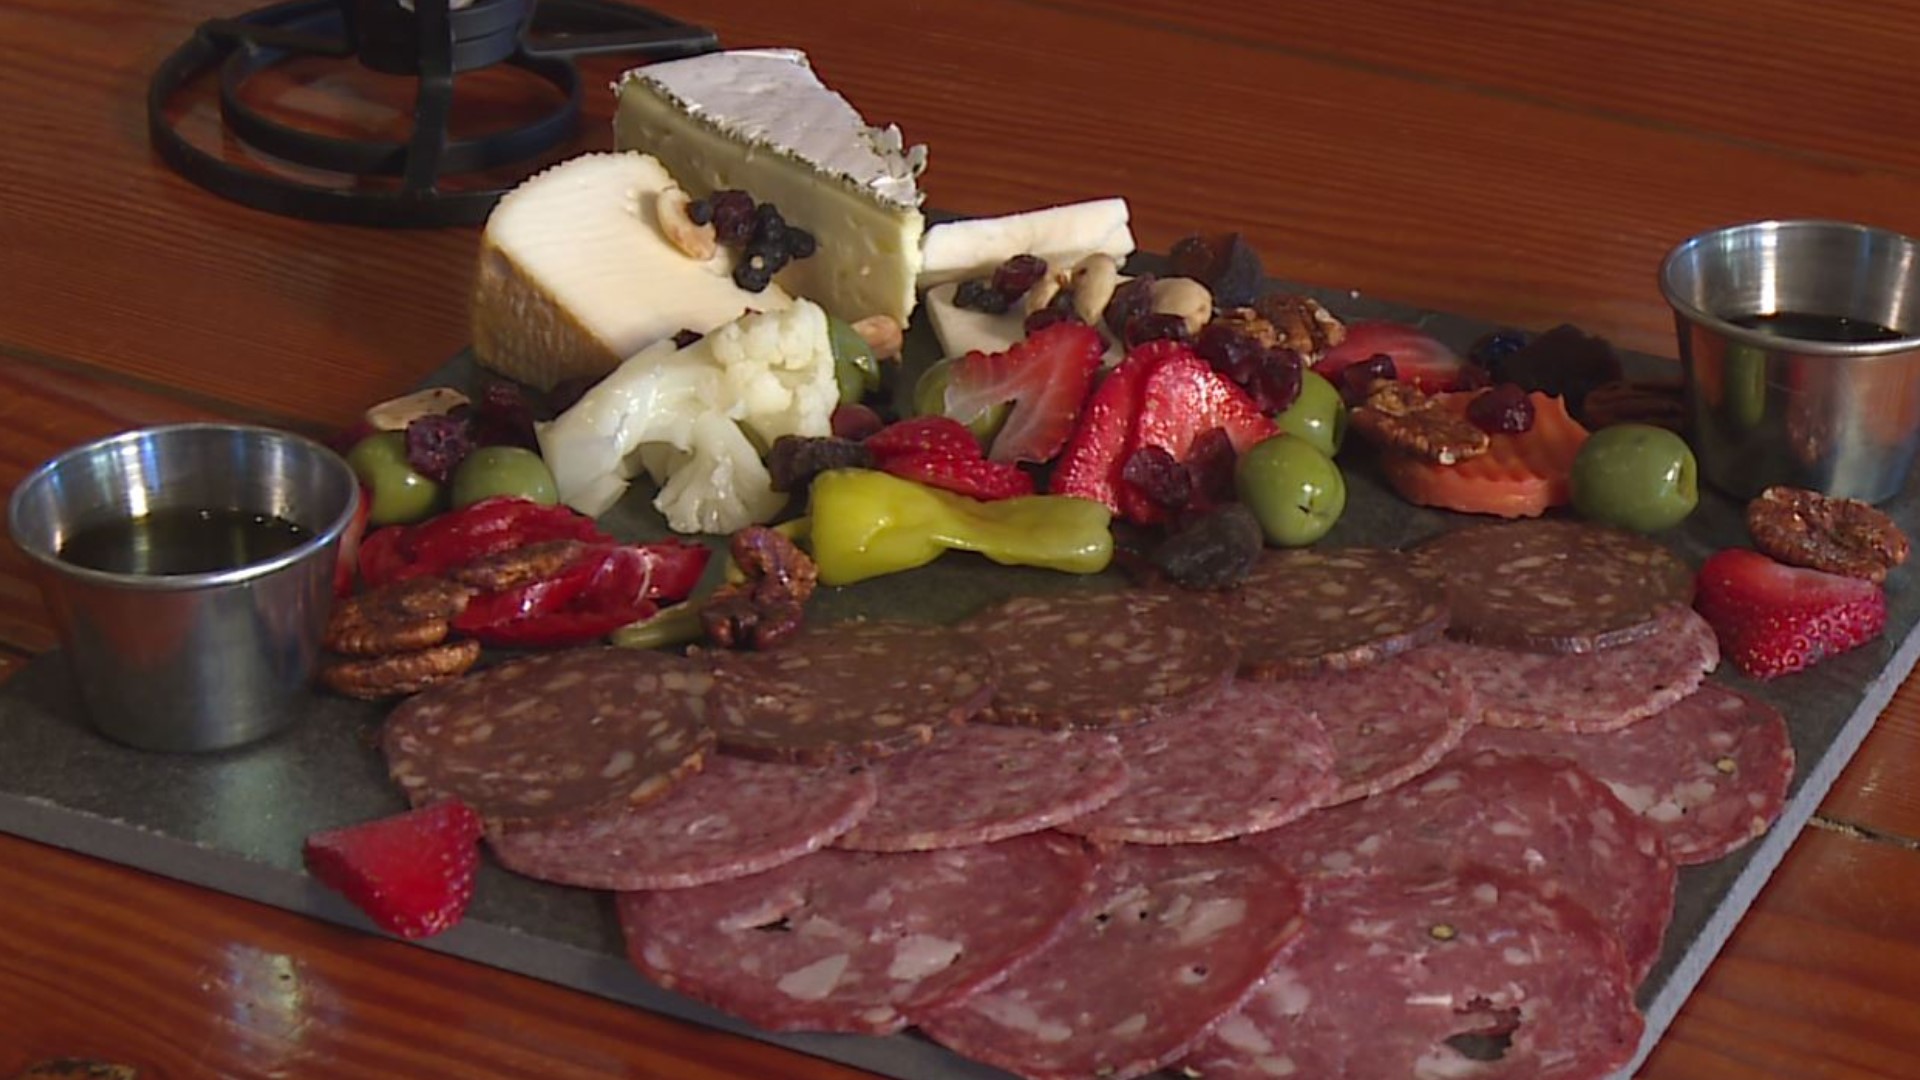 Try a charcuterie plate from Stink with a screening of The Secret of Santa Vittoria